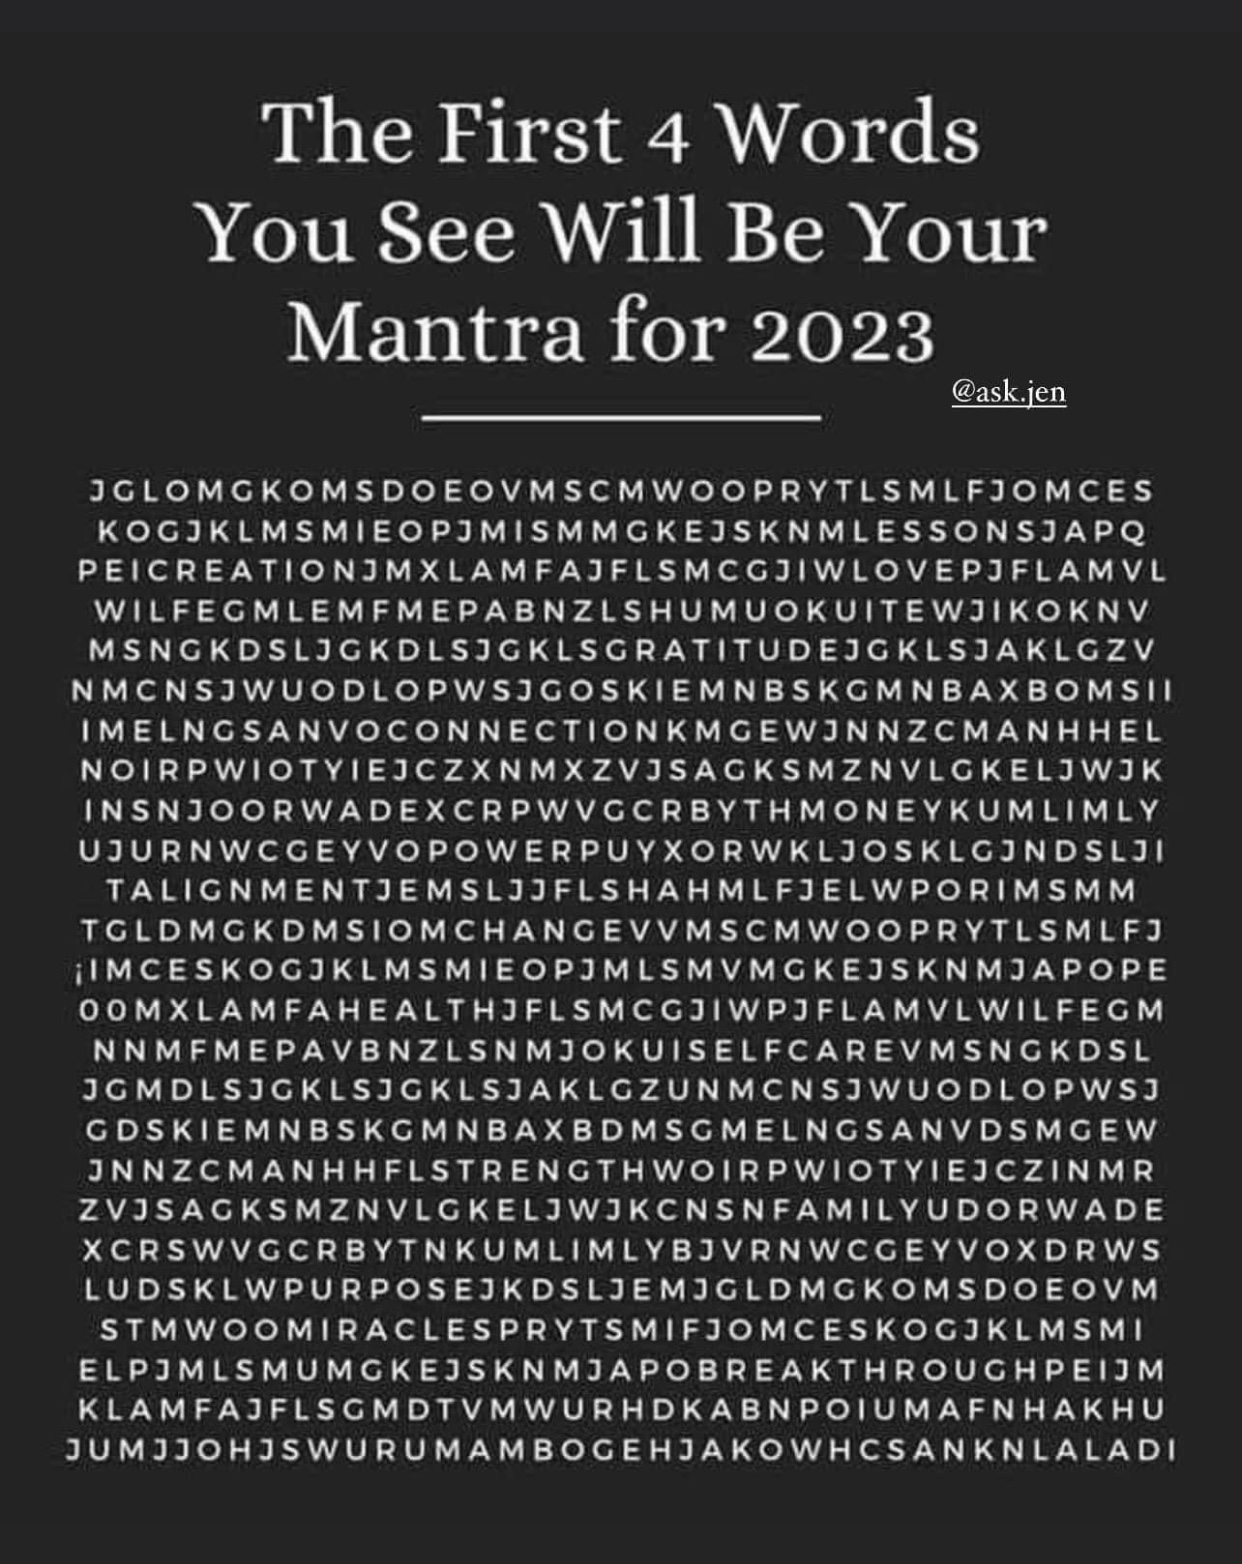 The first 4 words you see will be your mantra for 2023 The Social